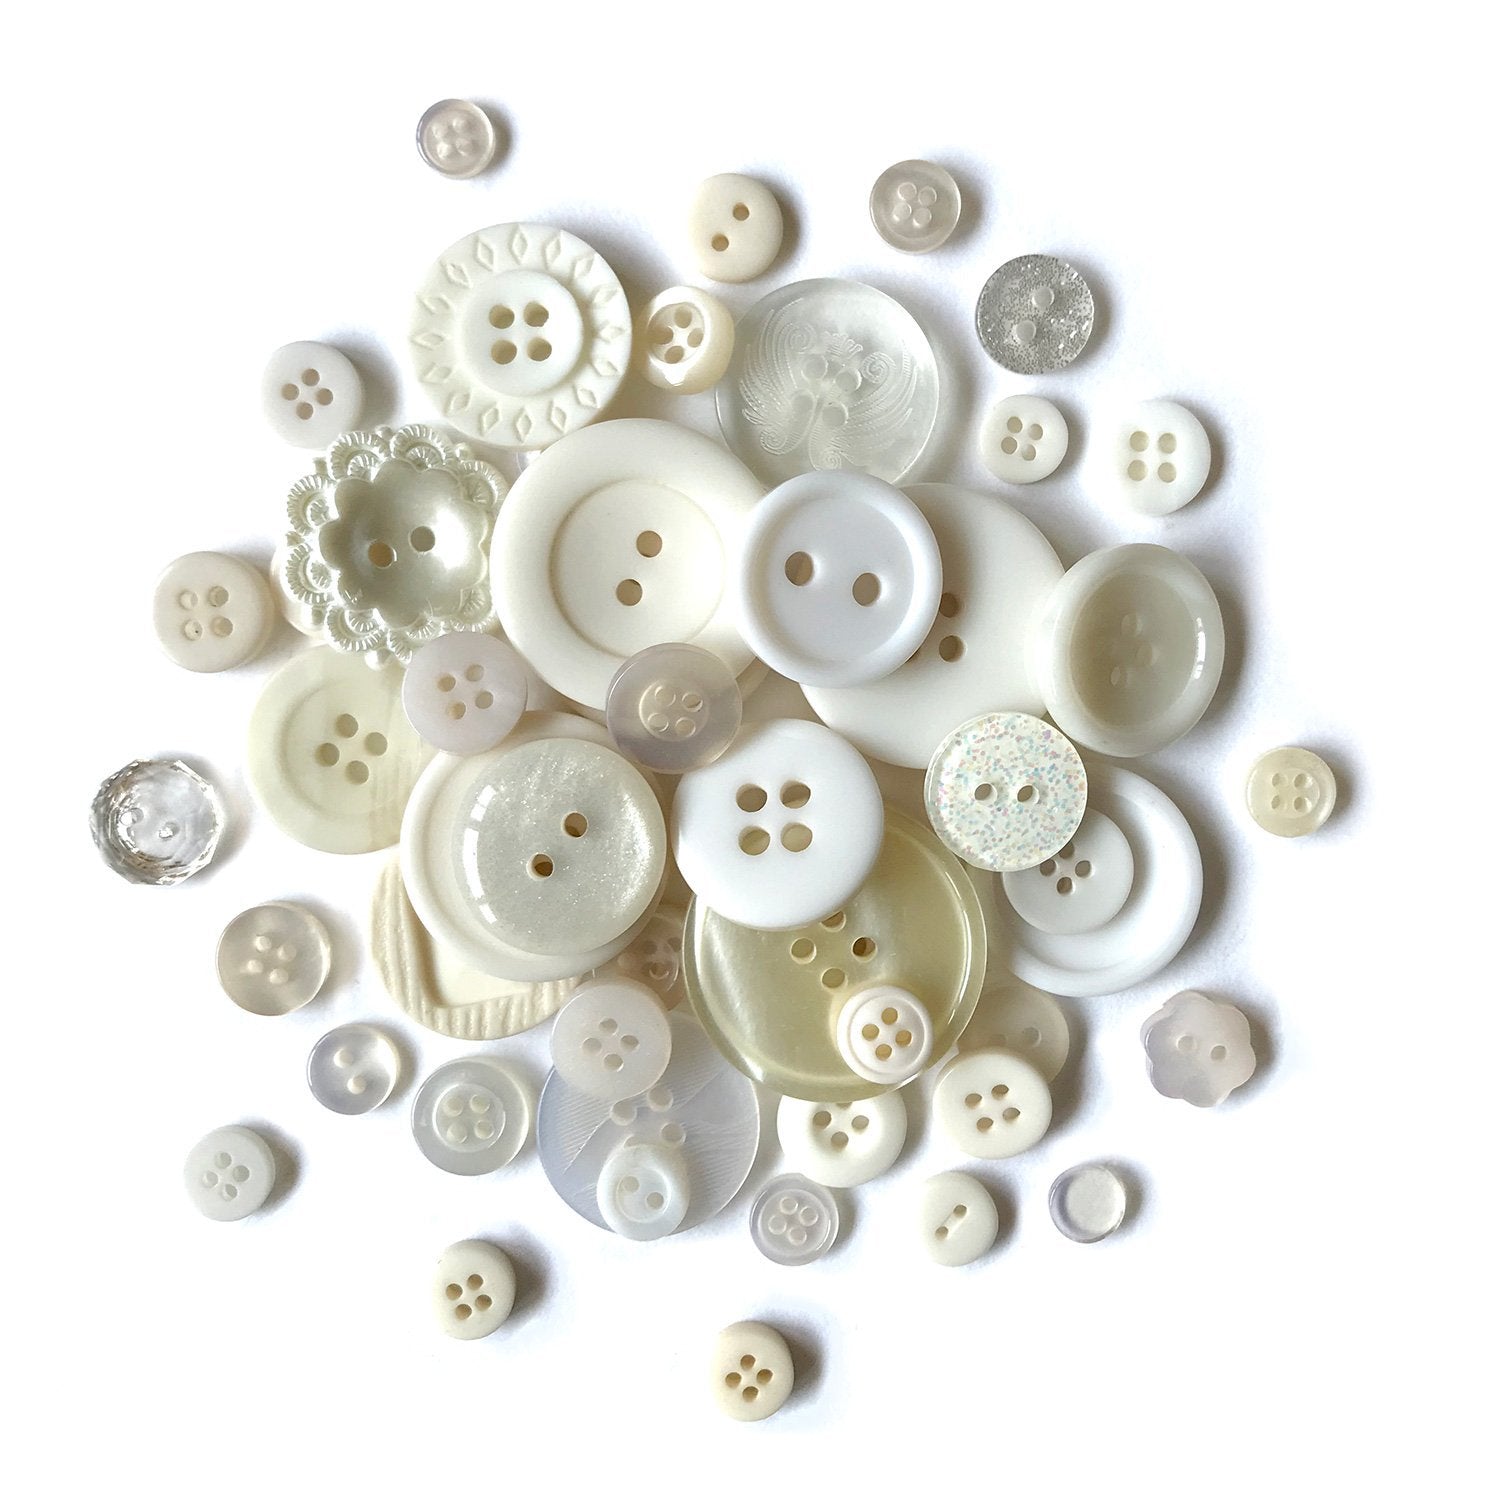 Antique White-MJ112 - Buttons Galore and More